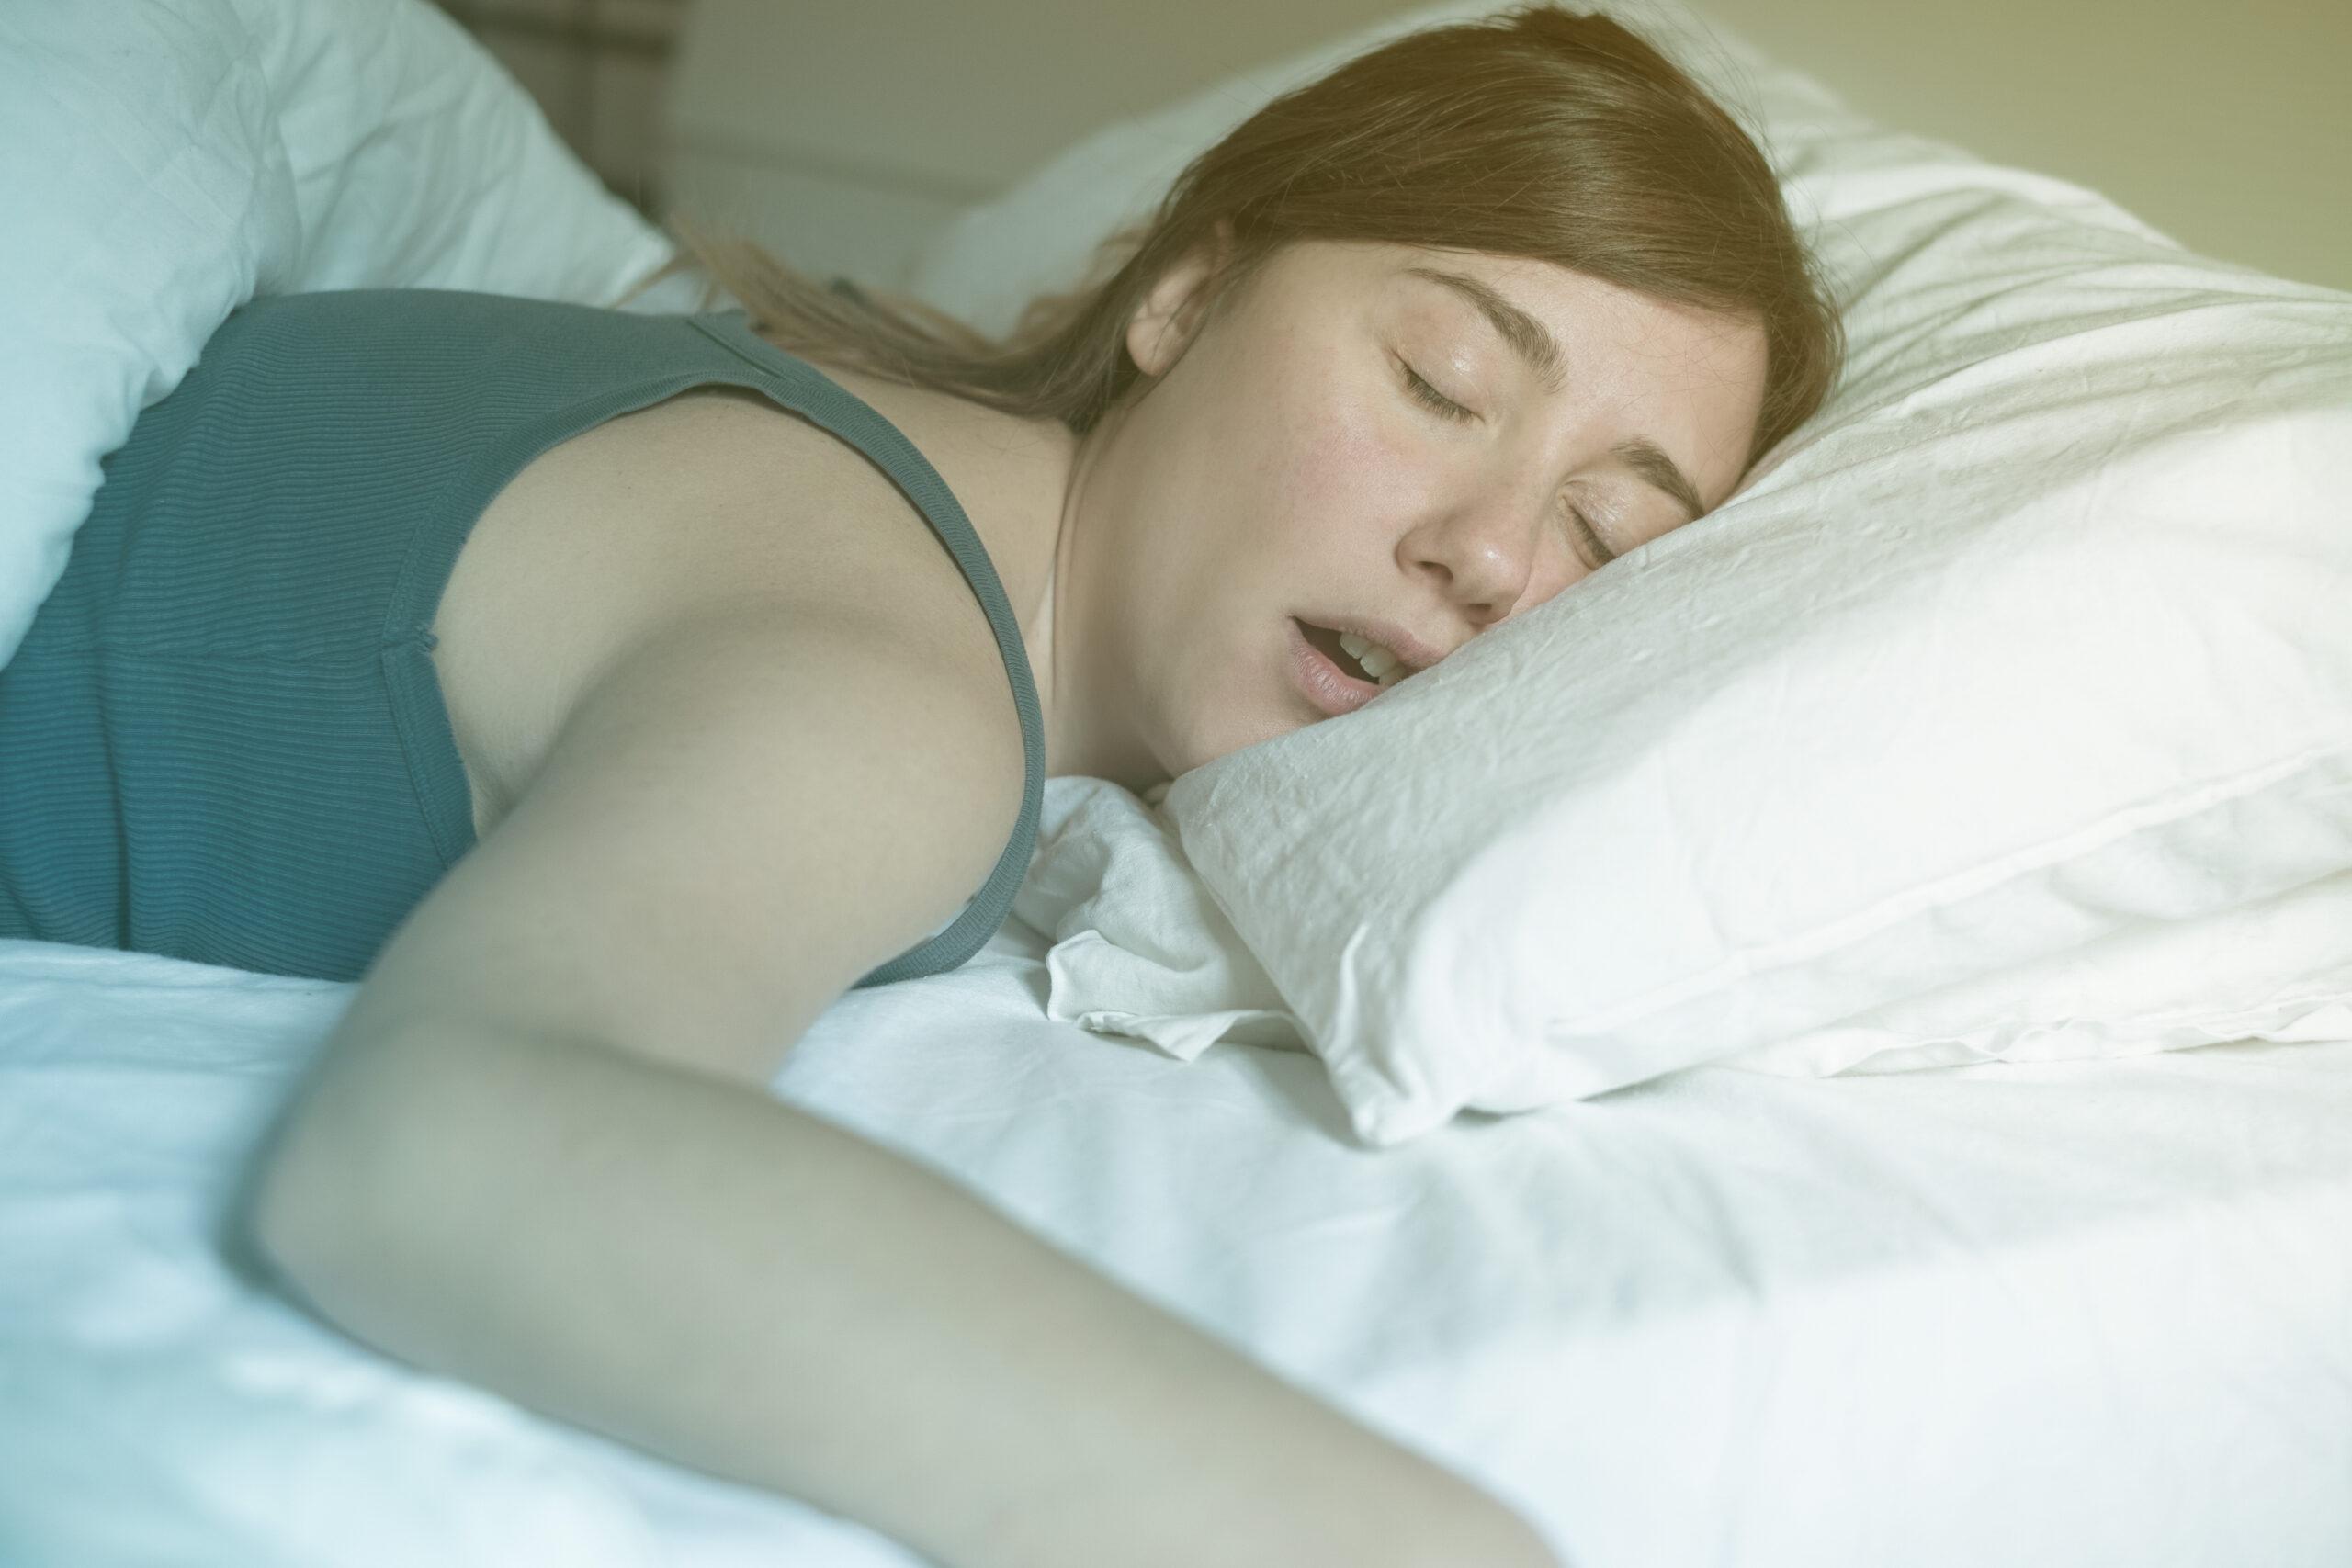 Learn more about mouth breathing during sleep